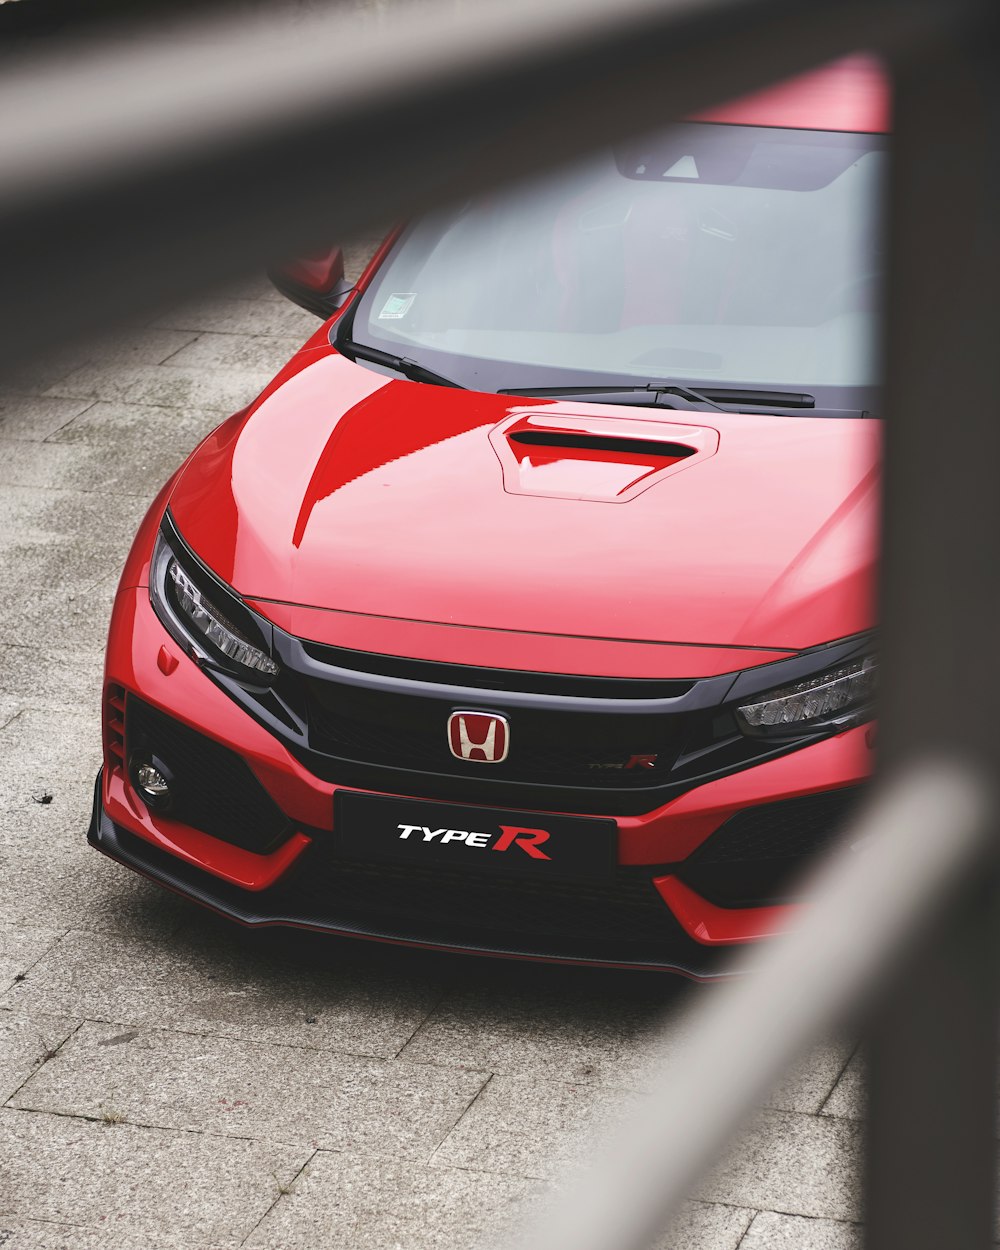 Honda Civic Type R Pictures Download Free Images On Unsplash